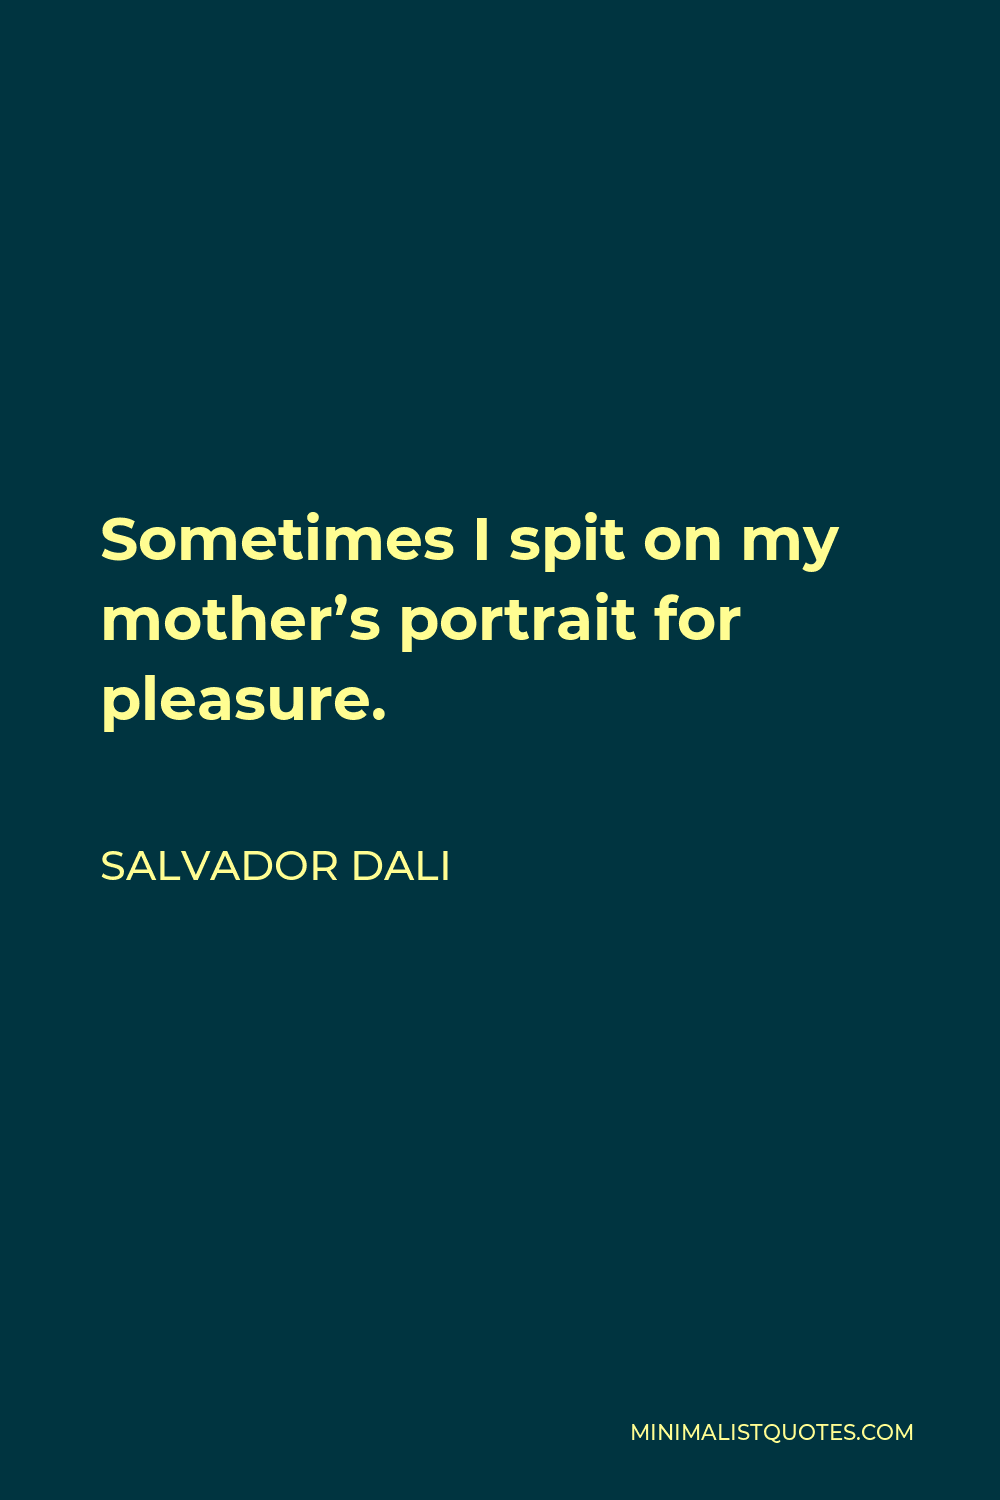 Salvador Dali Quote - Sometimes I spit on my mother’s portrait for pleasure.